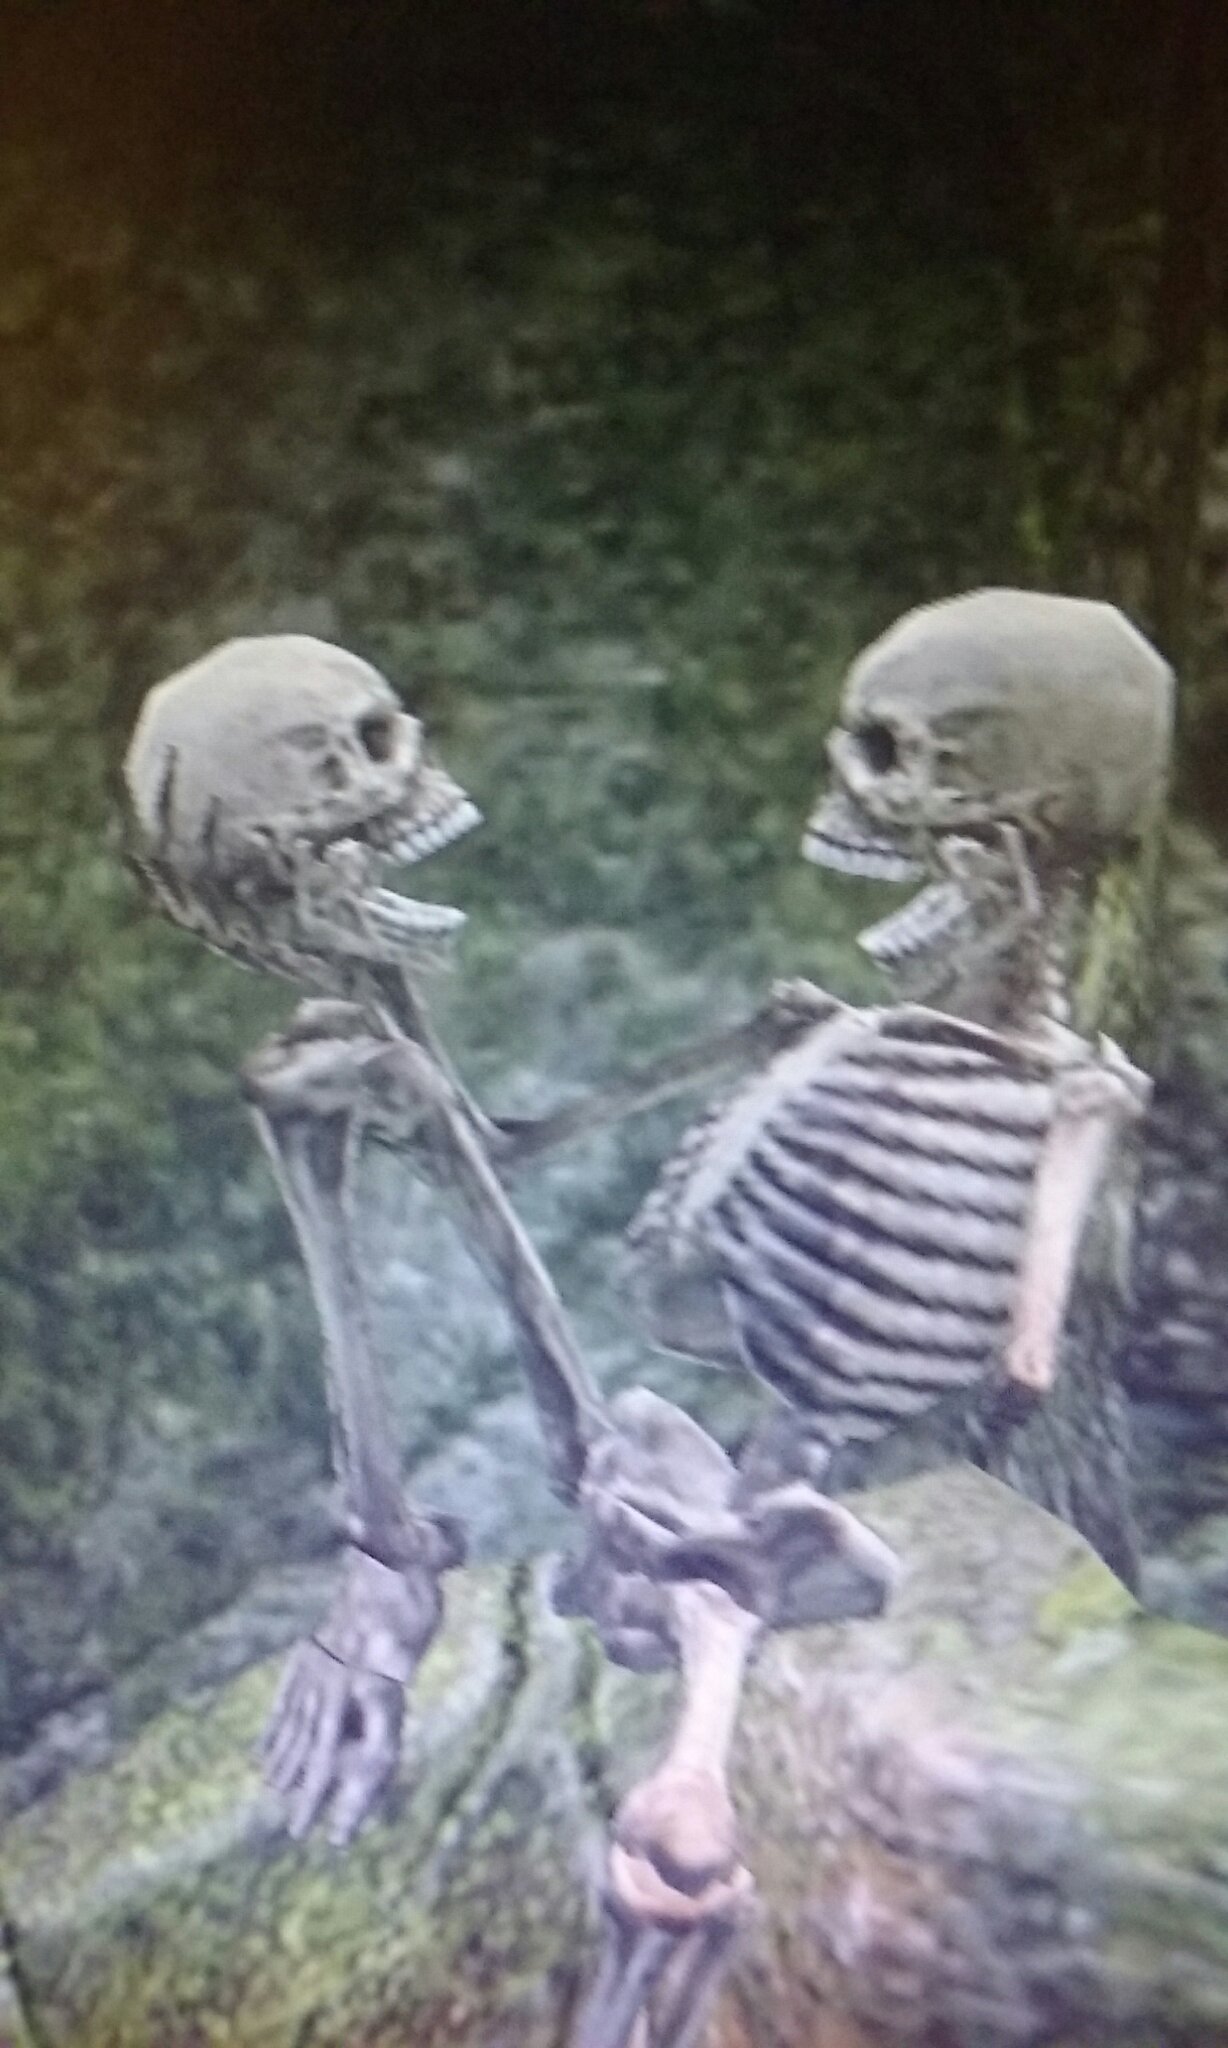 I found this on ESO, new "spooky" template for you - meme